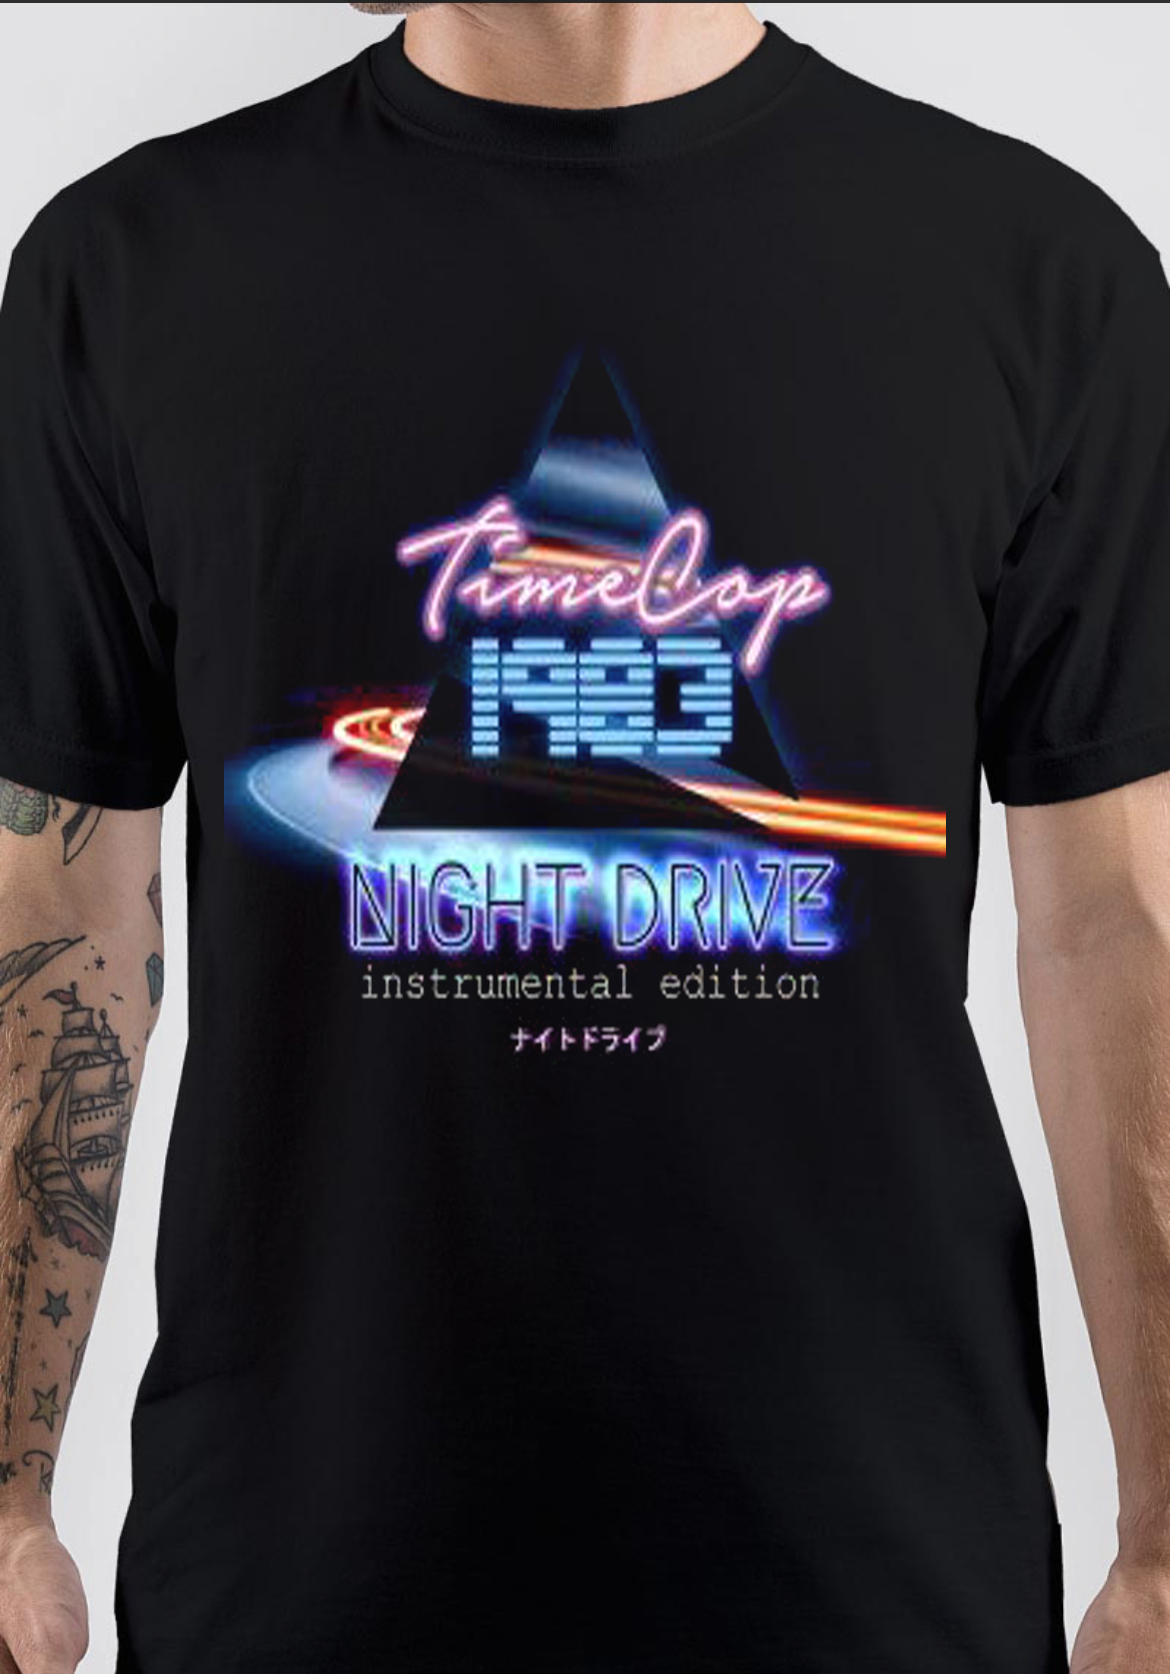 Timecop1983 T-Shirt And Merchandise